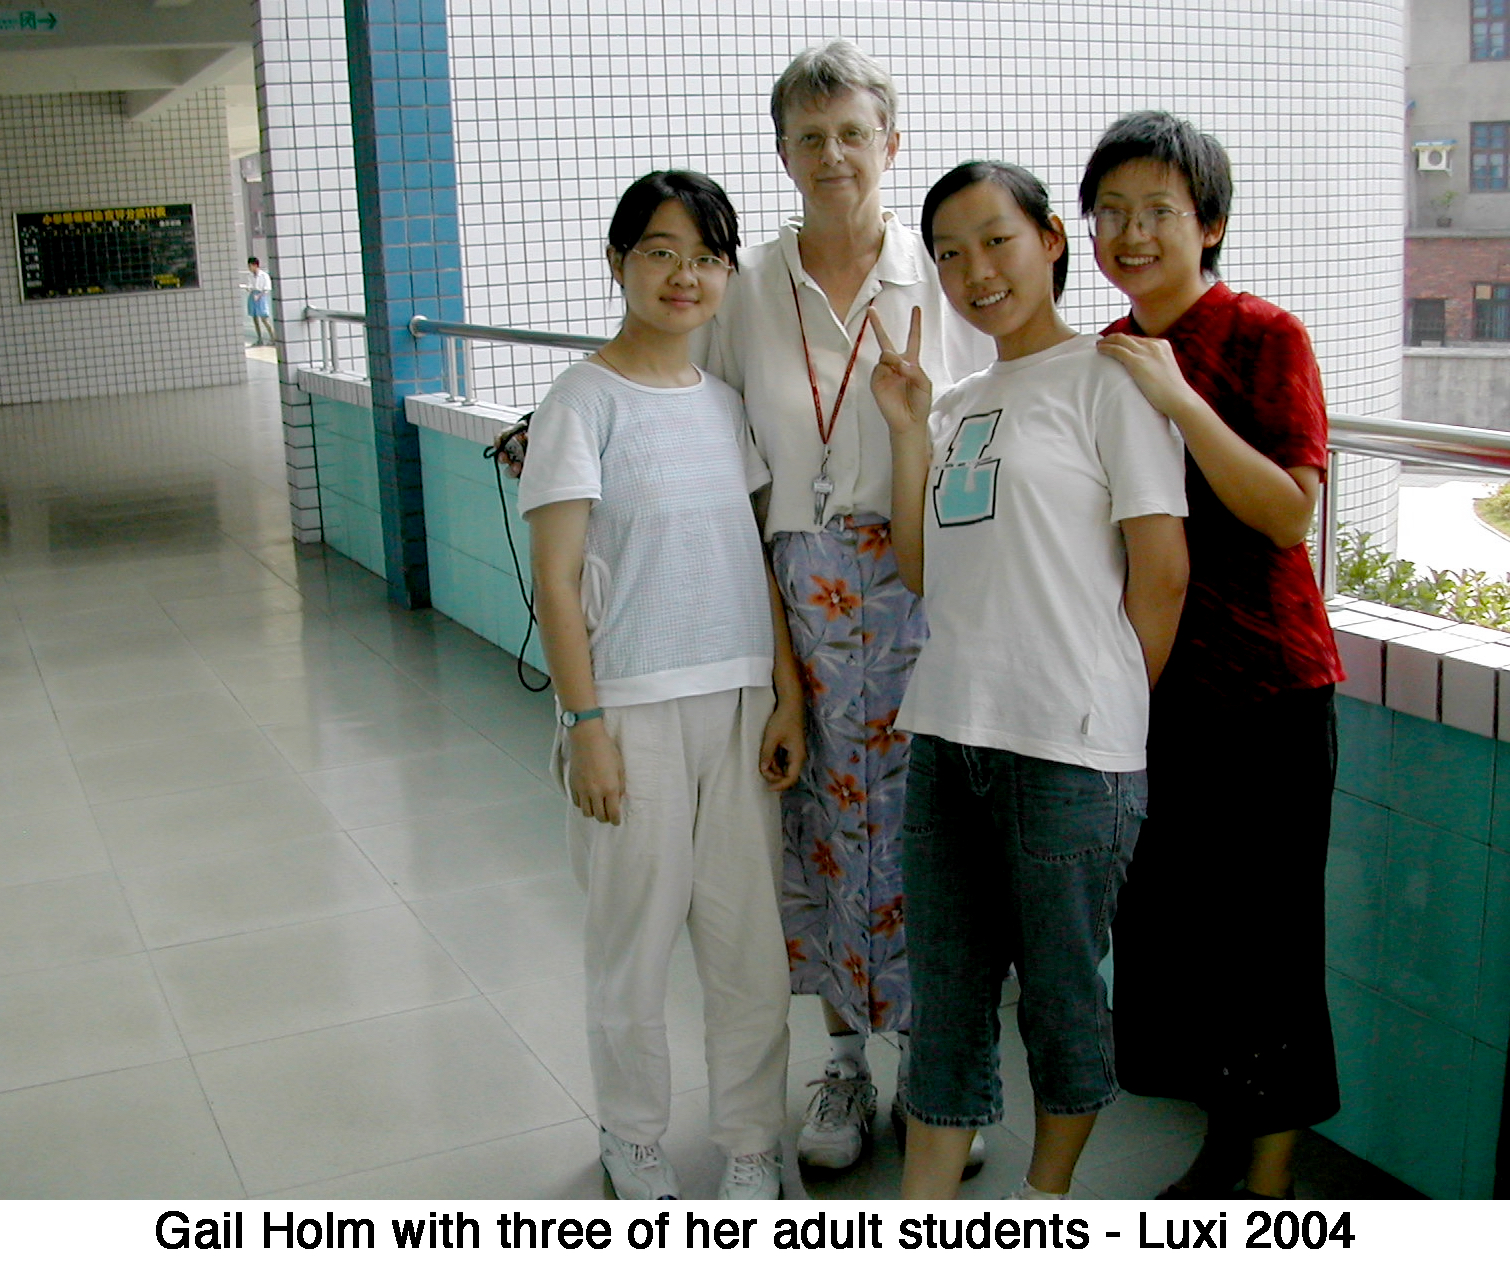 Gail standing in a hall with three adult students